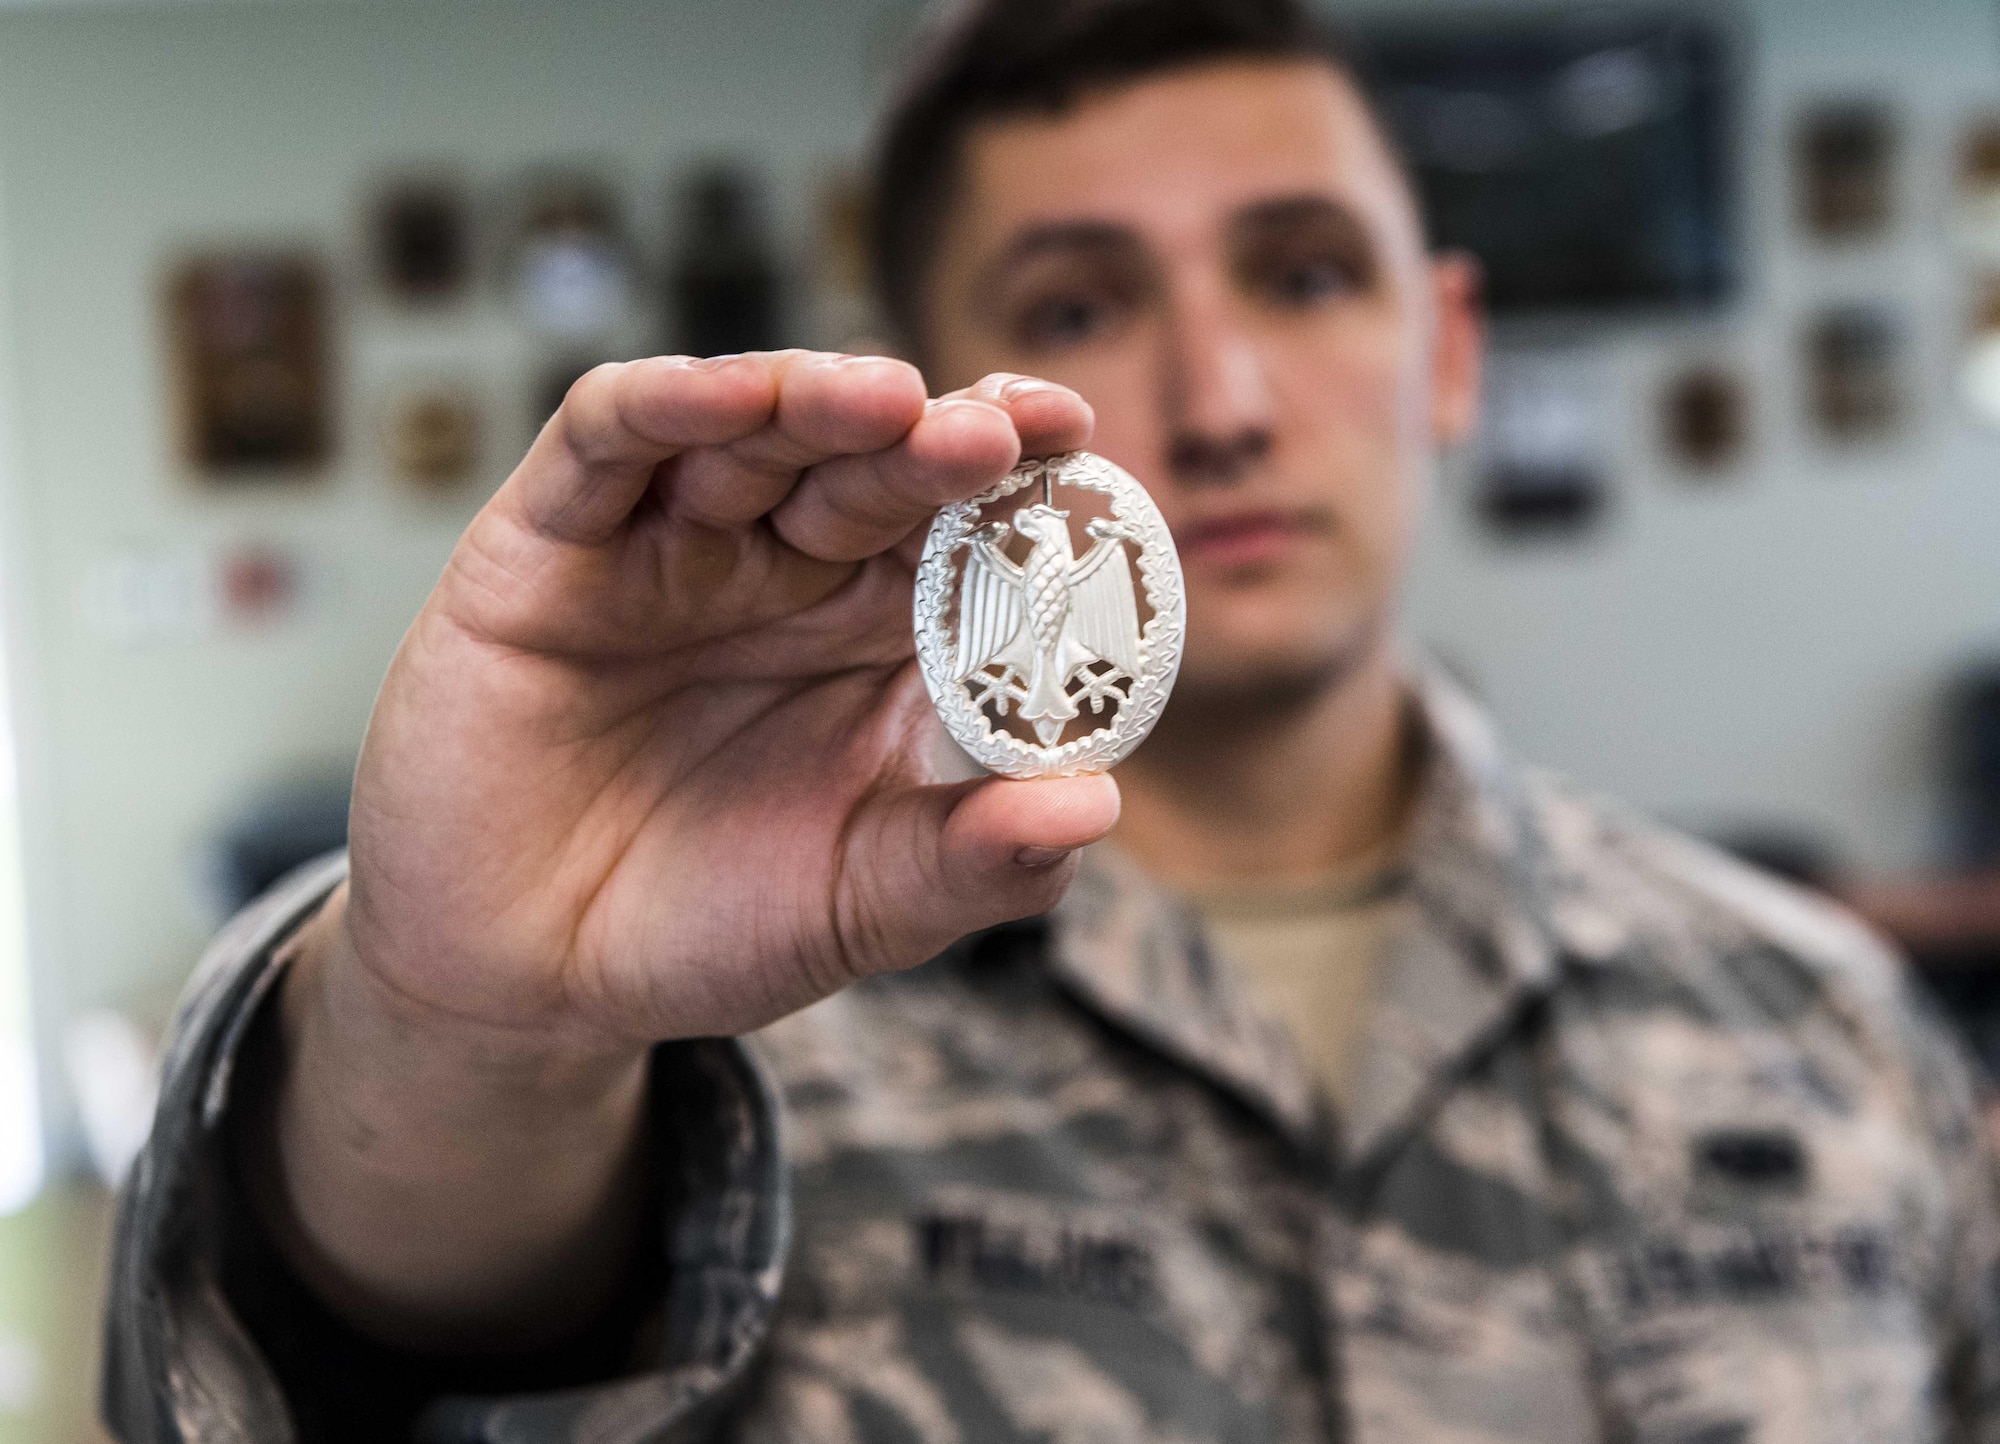 Staff Sgt. Brody Williams, 130th Airlift Wing defender, holds the gold German Armed Forces Proficiency Badge (GAFPB) he earned Sept. 16, 2017, at McLaughlin Air National Guard Base, Charleston, West Virginia. The GAFPB a decoration of the Bundeswehr, the Armed Forces of the Federal Republic of Germany. As one of the few foreign badges that are authorized to be worn on the U.S. military uniform, the GAFPB is one of the most highly sought-after awards. Williams earned the gold badge after completing a rigorous course with nine other defenders from the 130th AW.(U.S. Air National Guard photo by Tech. Sgt. De-Juan Haley)